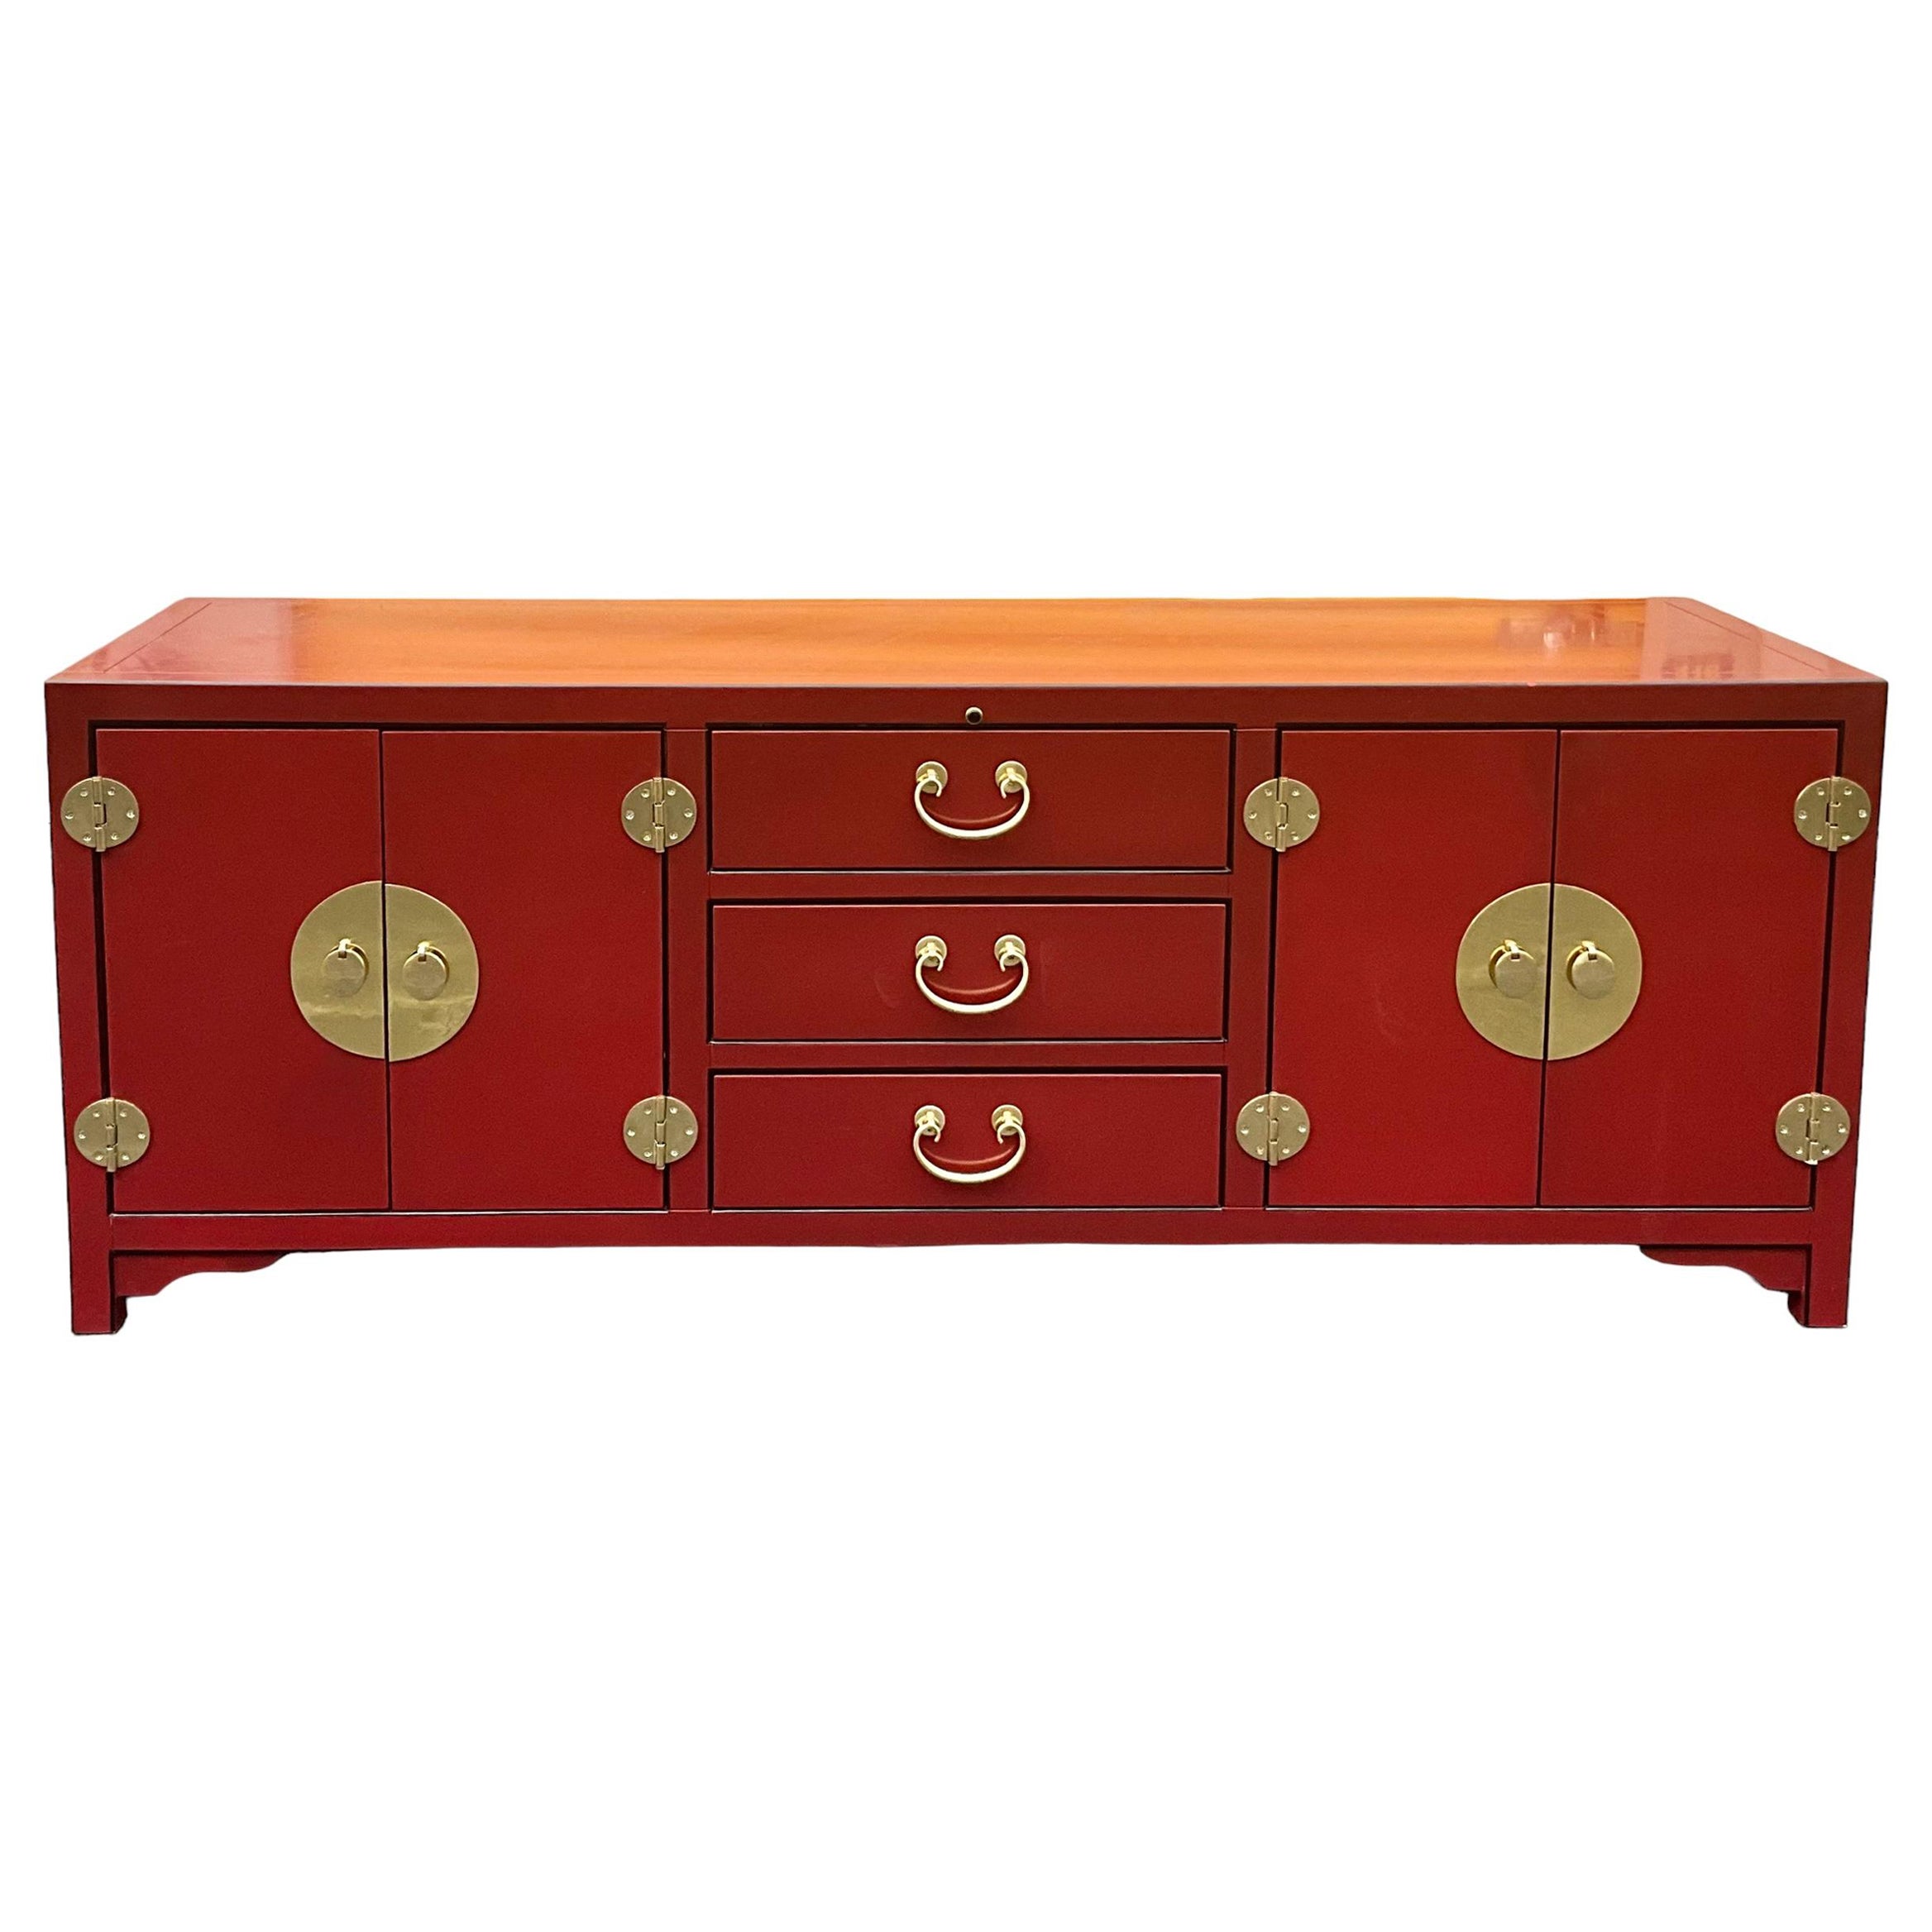 Late 20th-C. Ming Style Red Lacquer & Brass Credenza / Media Cabinet By Sligh  For Sale